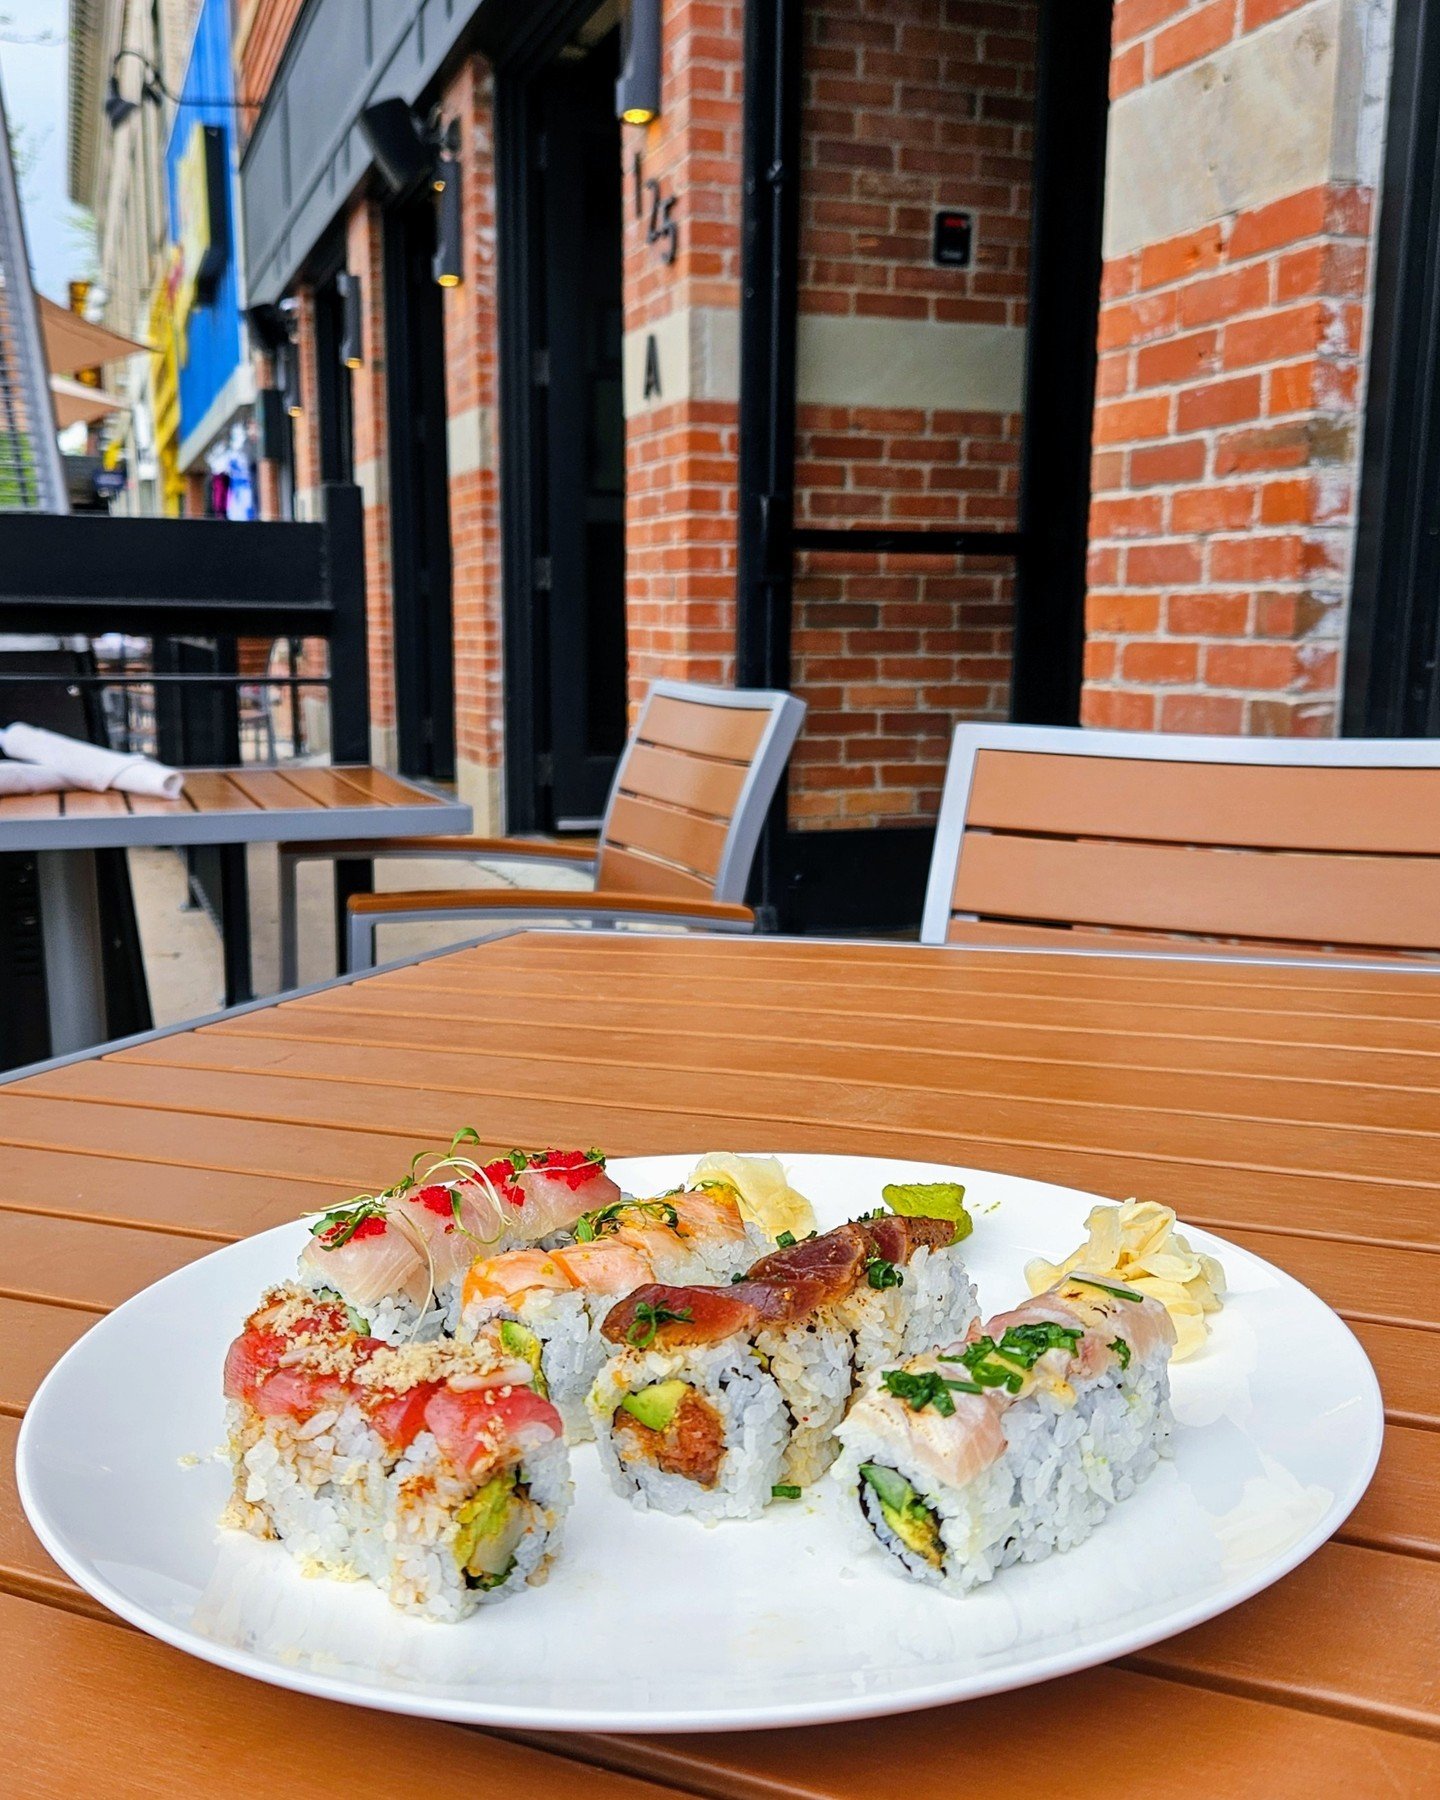 Sure, you could eat lunch at your desk while sifting through emails. . . OR you could take an hour of 'me time,' grab a seat outside, and enjoy some sushi with a side of sunshine ☀️🍣